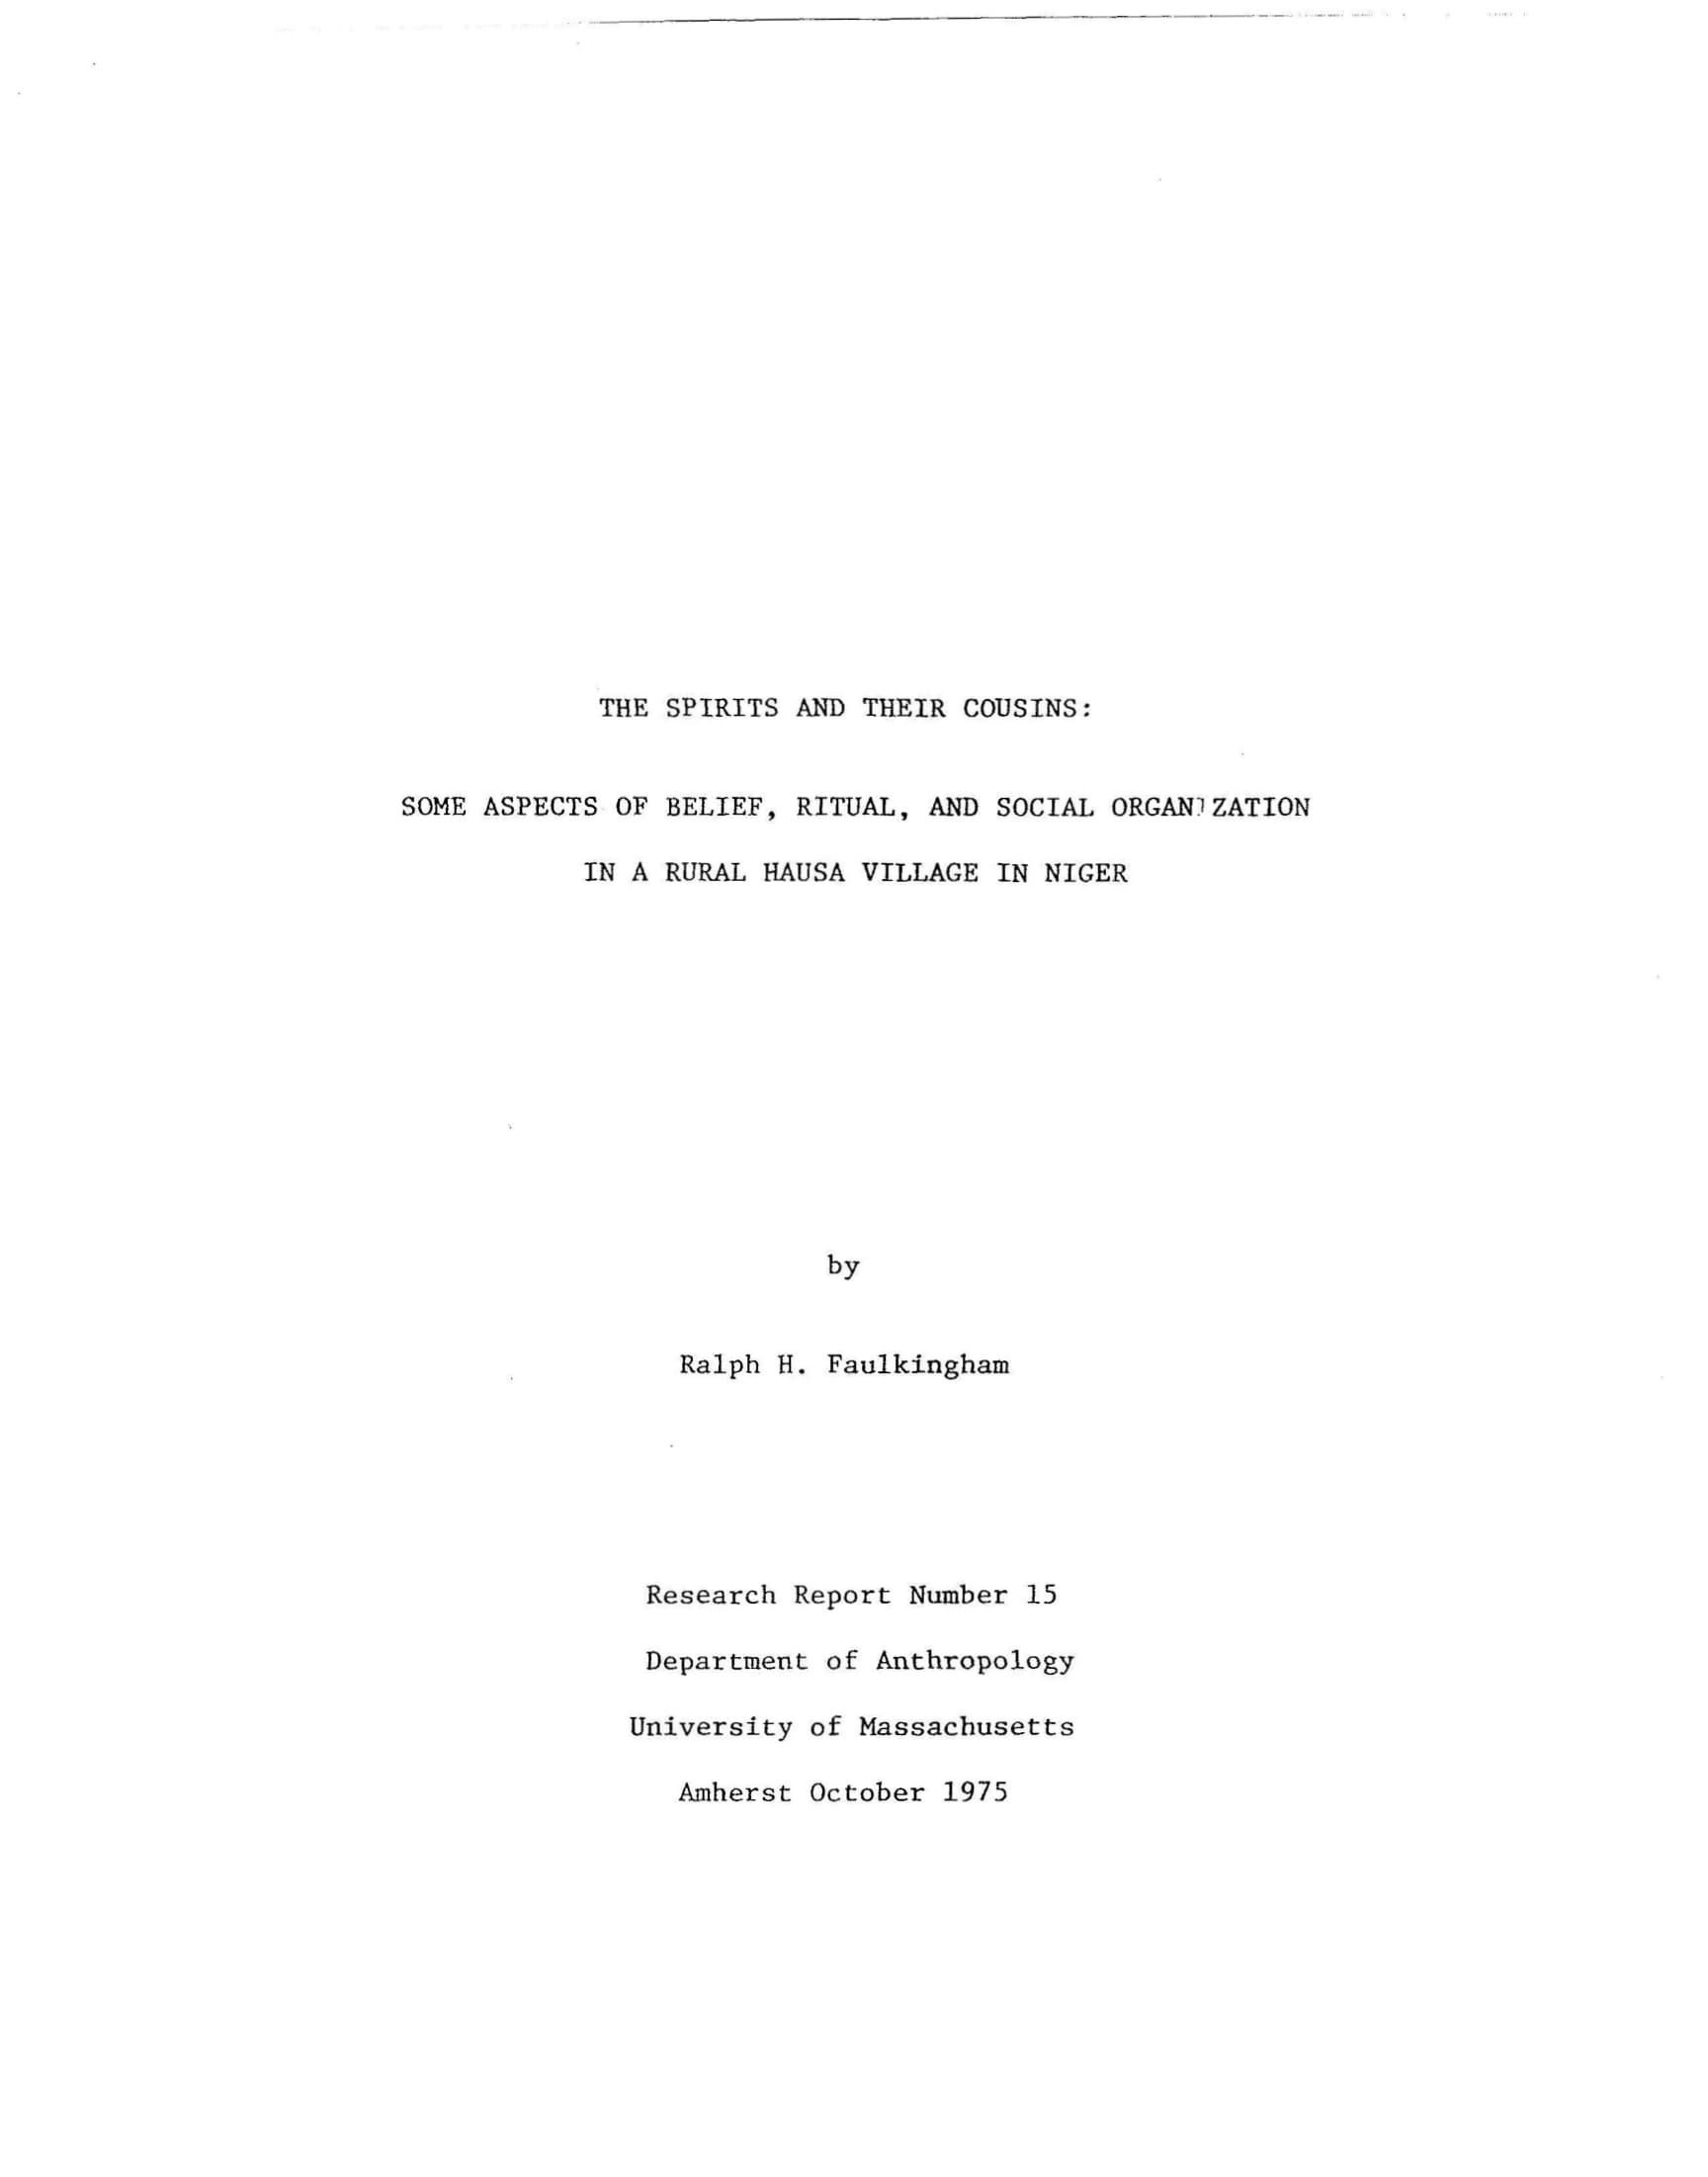 title cover page